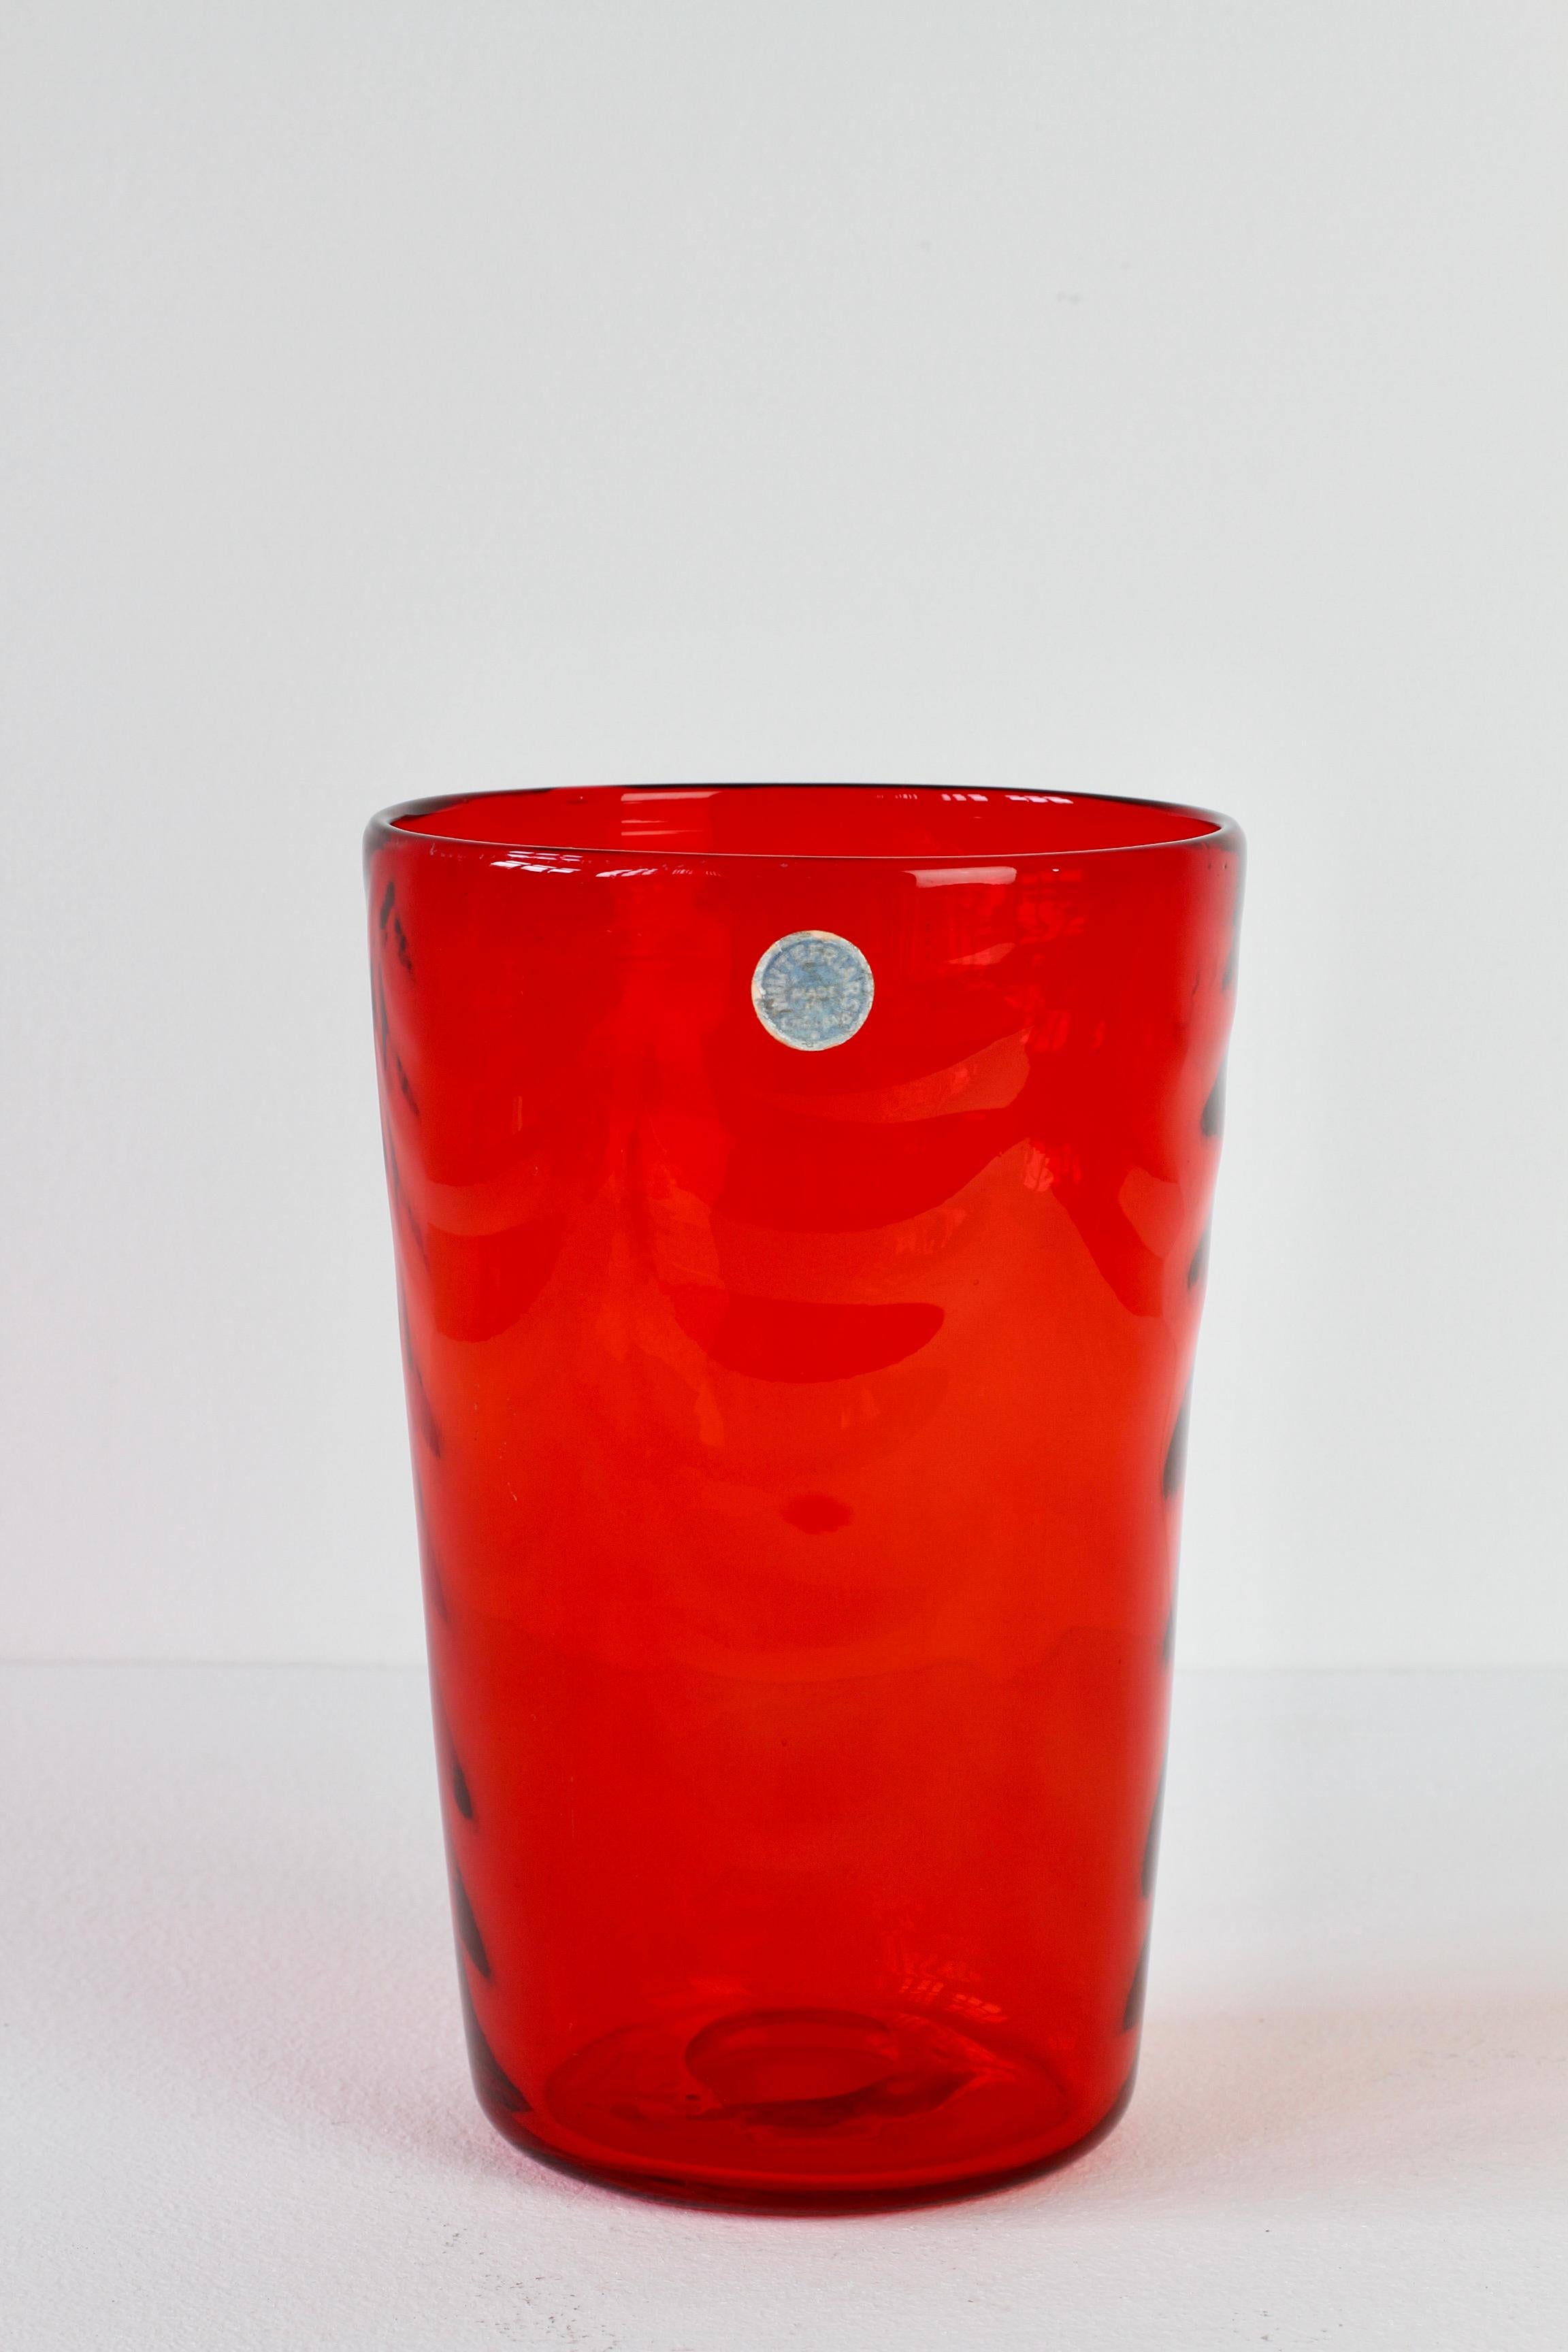 Whitefriars Vintage Vibrant Red Glass Vase by Barnaby Marriott Powel, C. 1940 For Sale 4